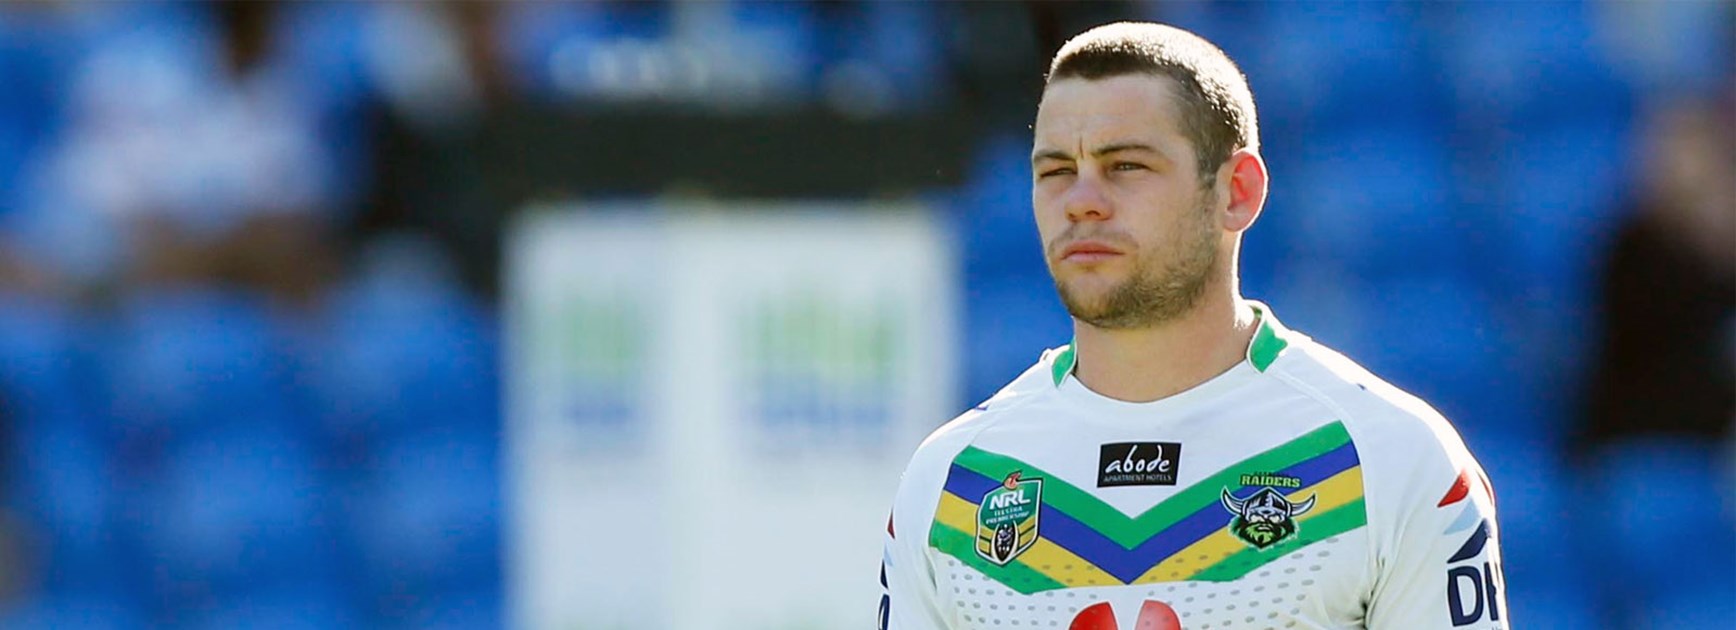 Canberra Raiders tackle machine Shaun Fensom is set to play in Round 1 after a quicker-than-expected return from injury.